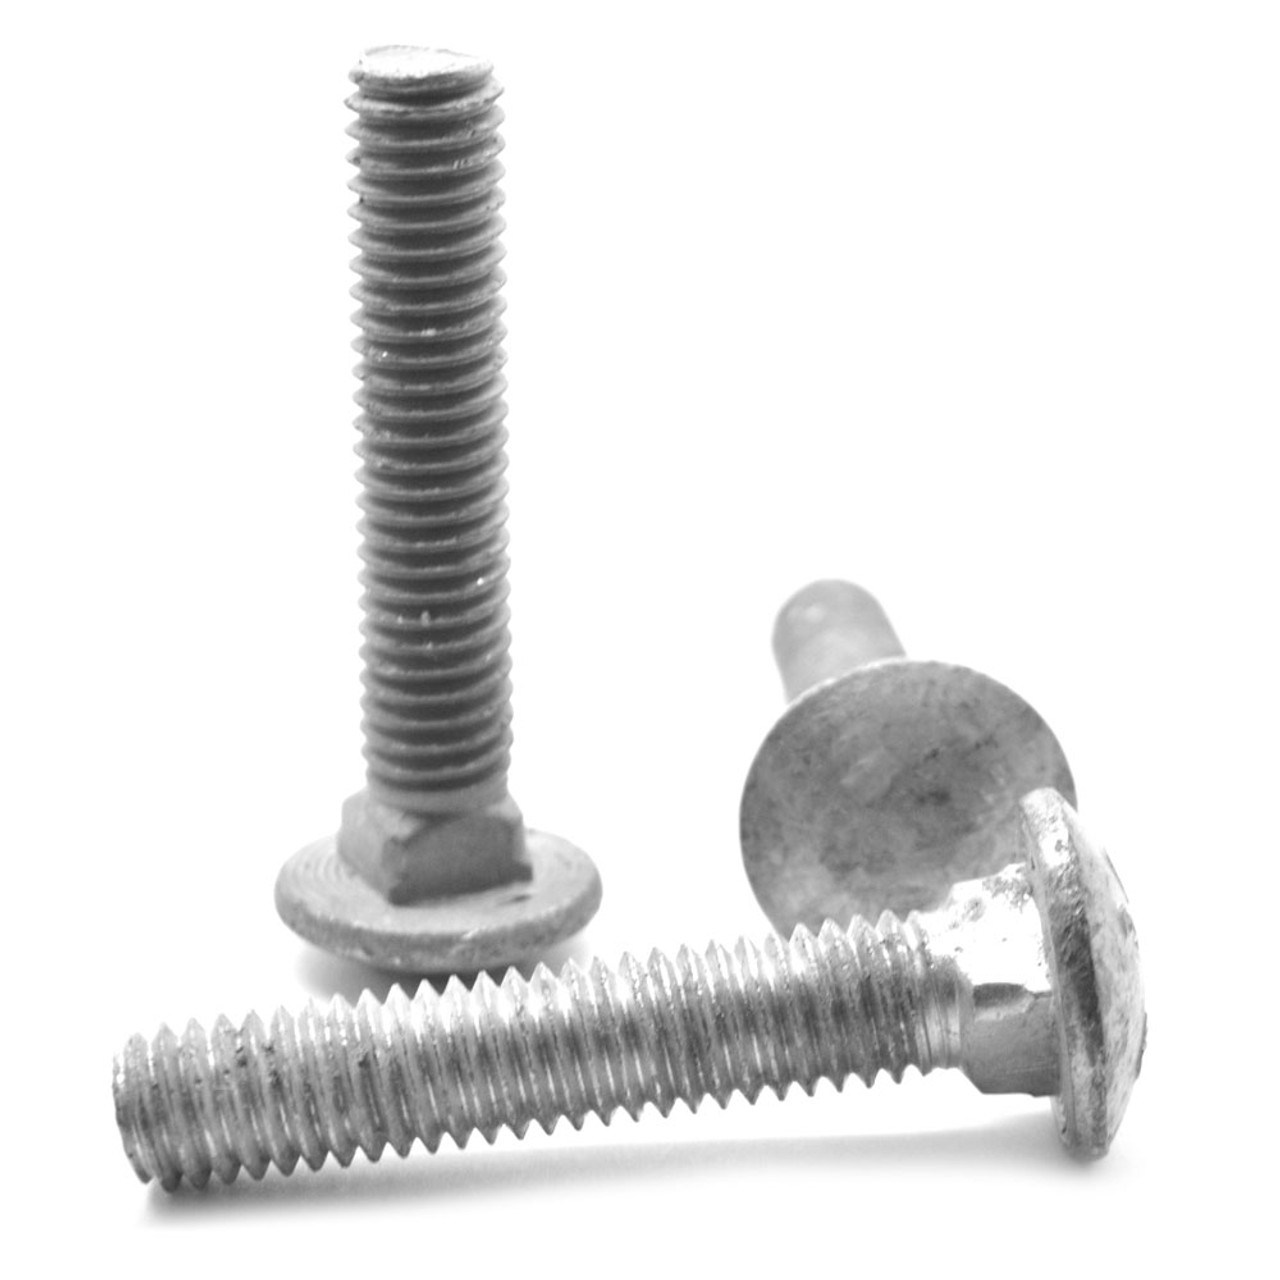 1/2"-13 x 6" (FT) Coarse Thread A307 Grade A Carriage Bolt Low Carbon Steel Hot Dip Galvanized